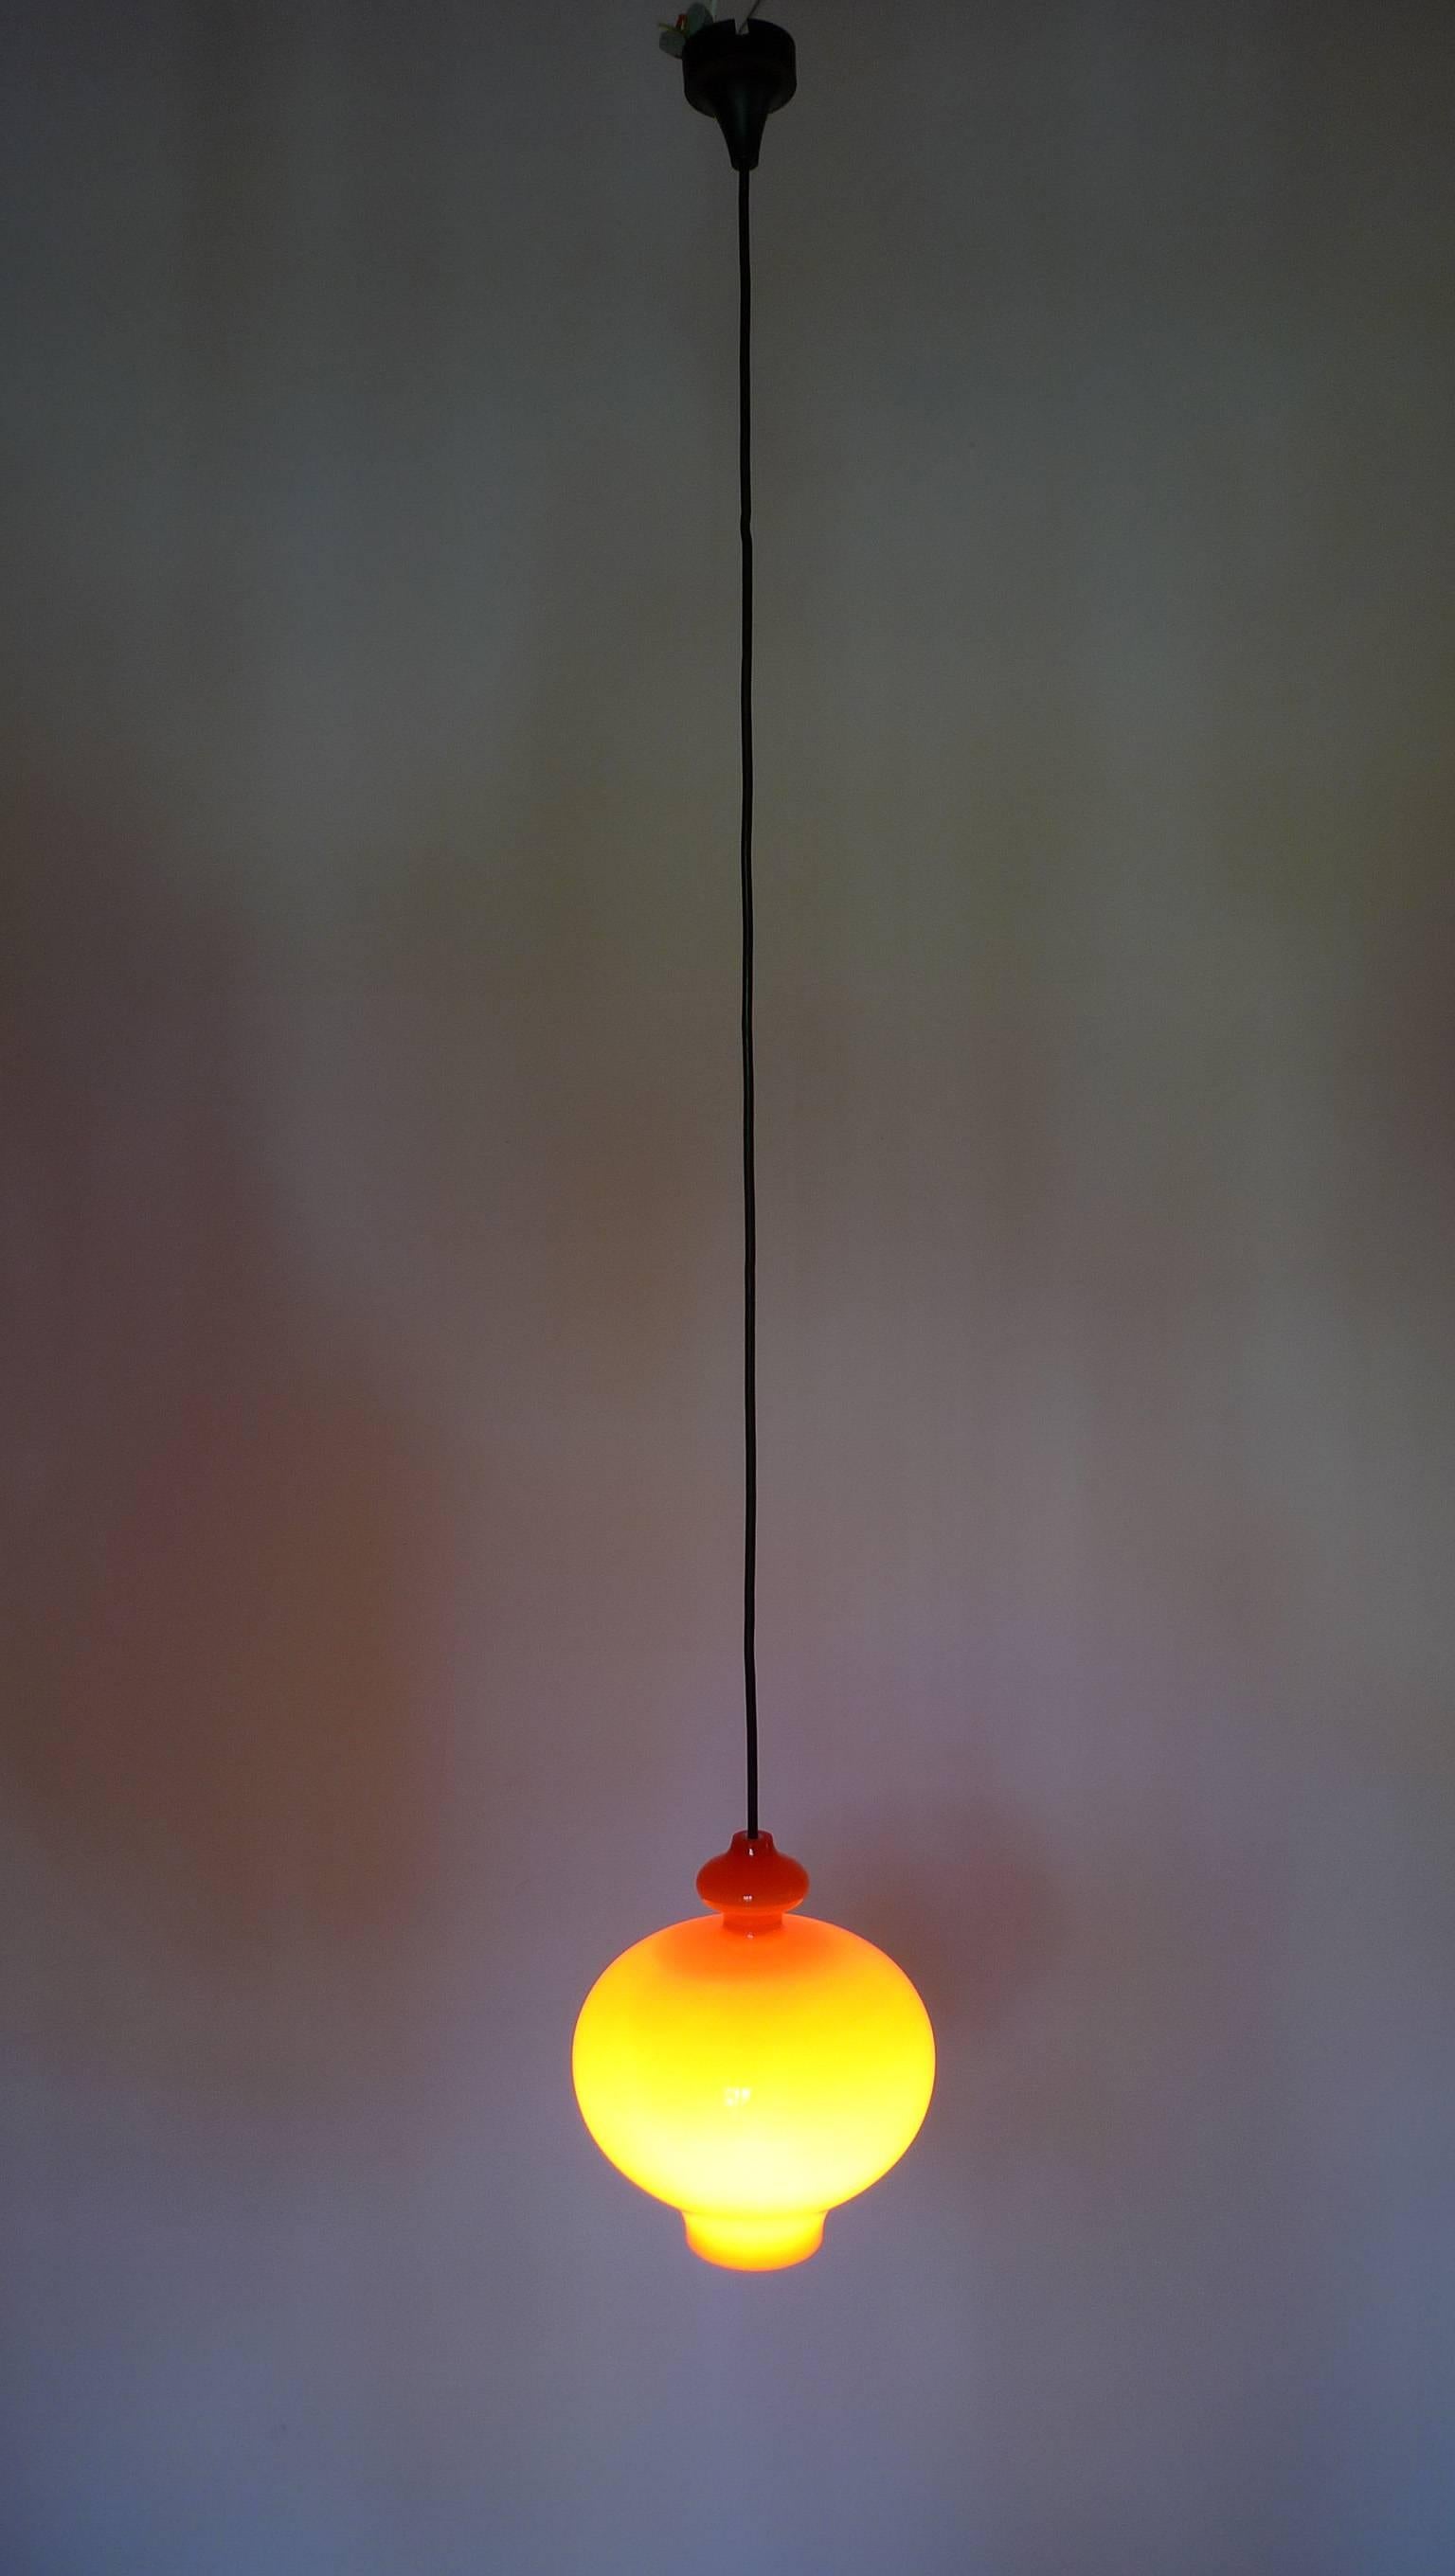 Orange Pendant Lamp of Handblown Glass by Holmegaard for Staff, Germany, 1960s For Sale 1